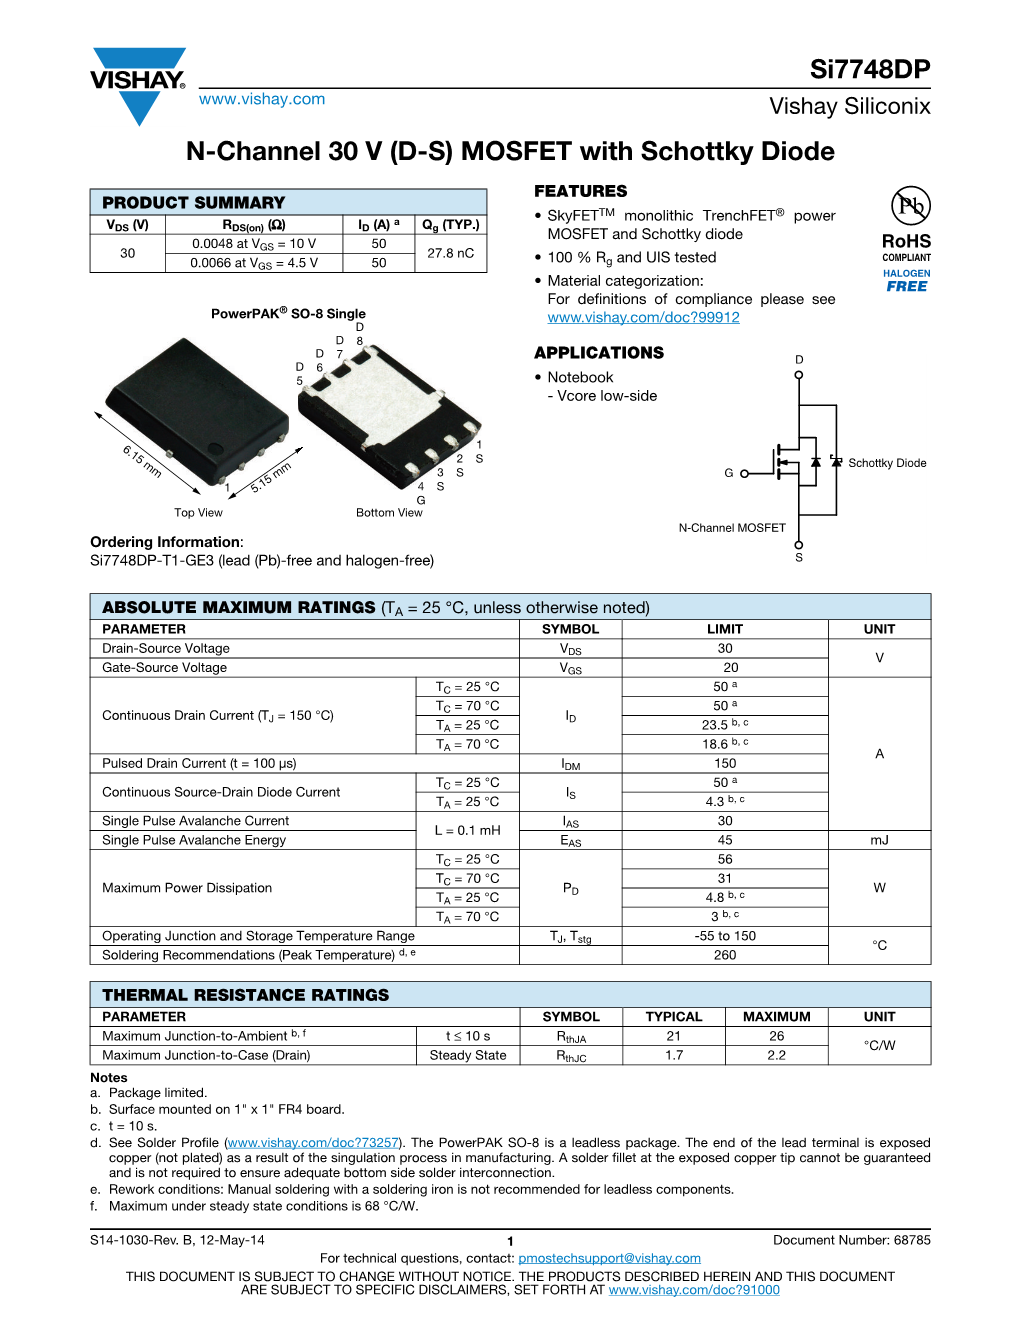 Si7748dp N-Channel 30 V (D-S) MOSFET with Schottky Diode